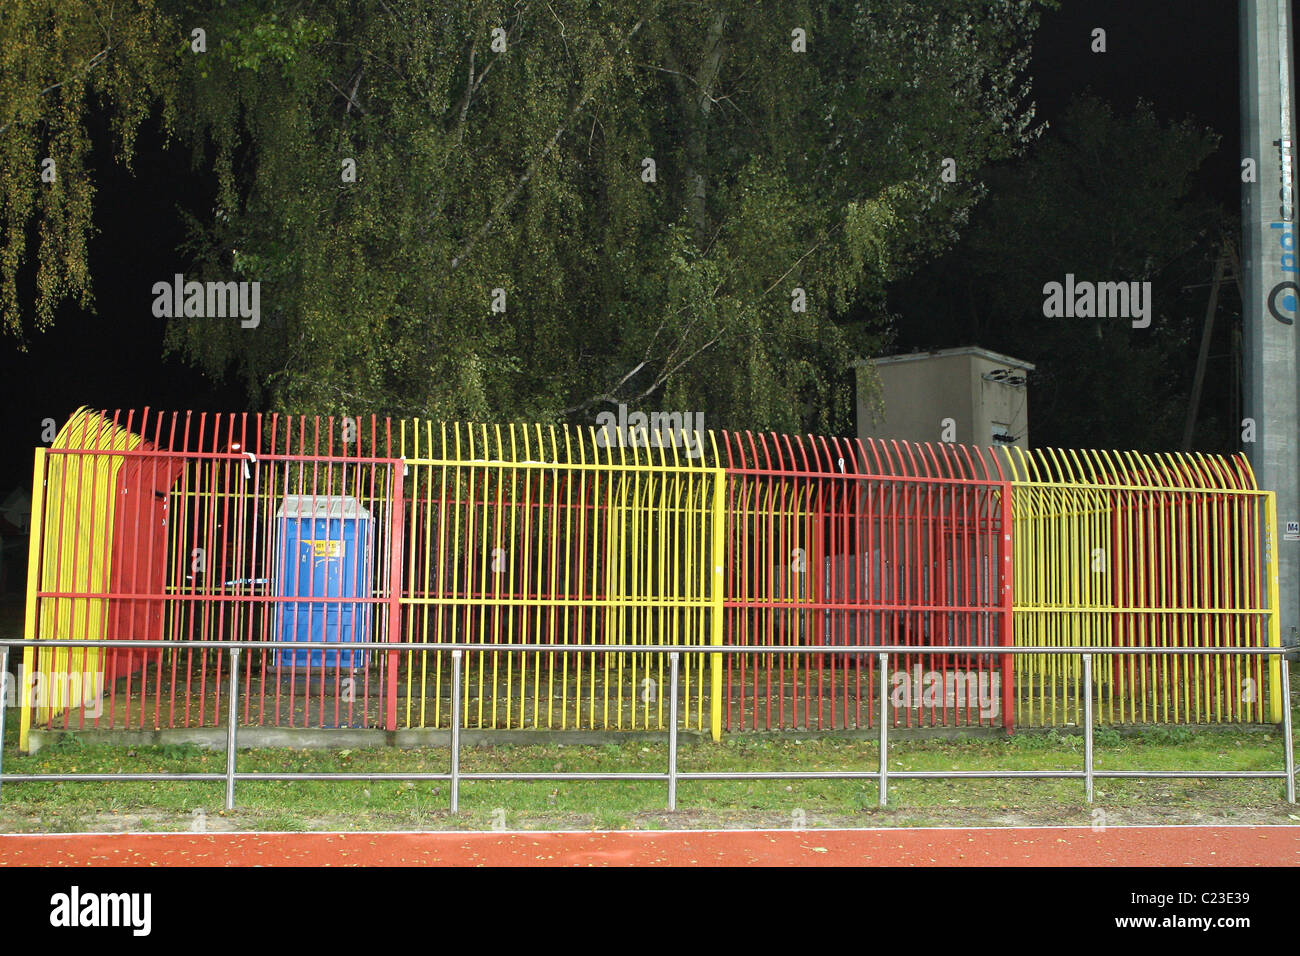 The away fans enclosure at Miejski Klub Sportowy Znicz Pruszkow in Poland Pruszkow, Poland - October 2009  **Not available for Stock Photo